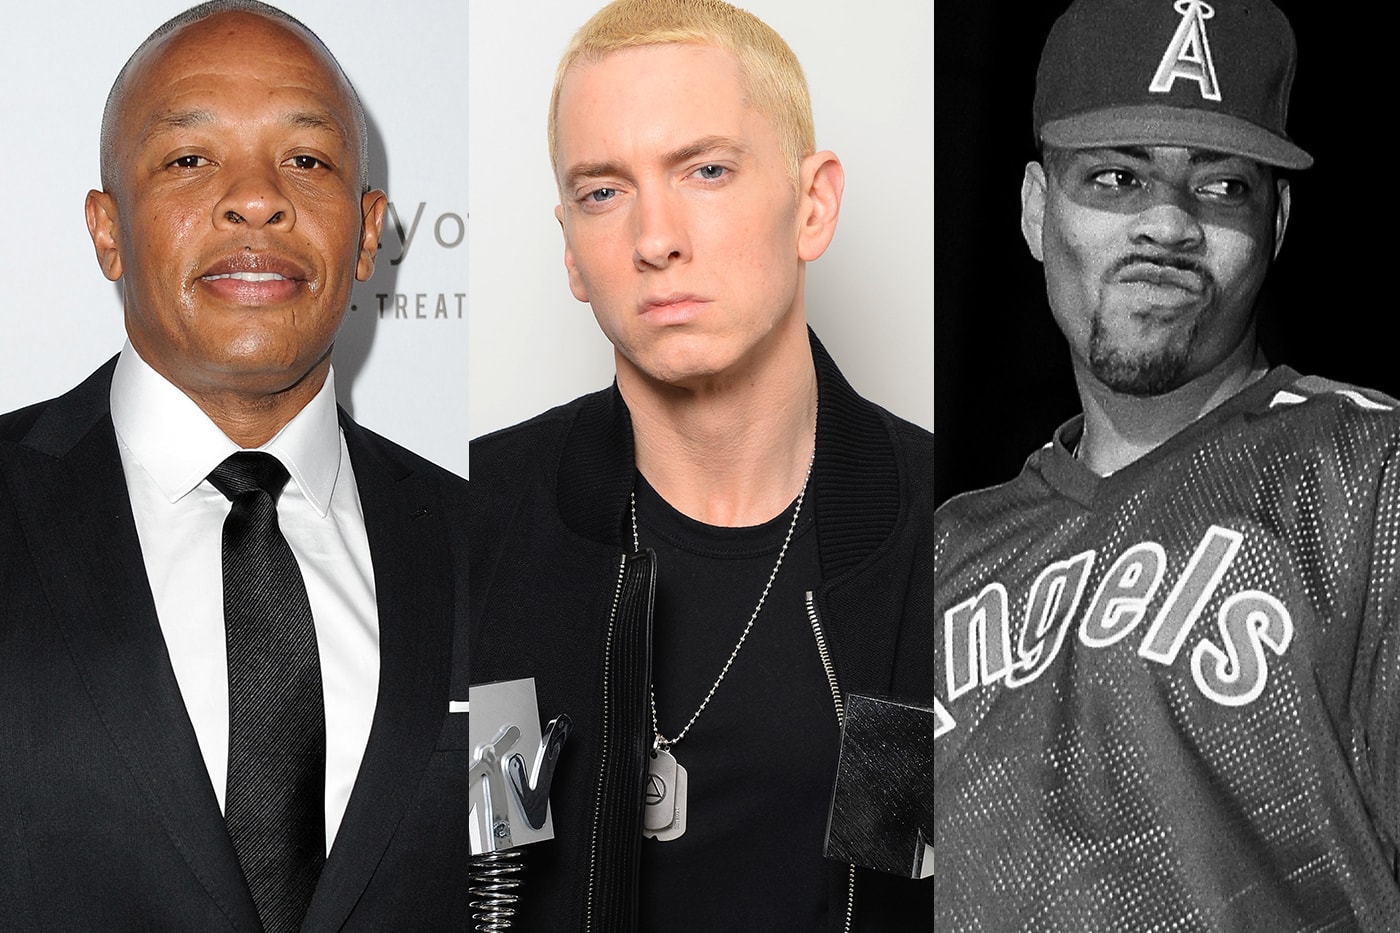 Eminem Dr. Dre The D.O.C. could be working on possible collab aftermath records